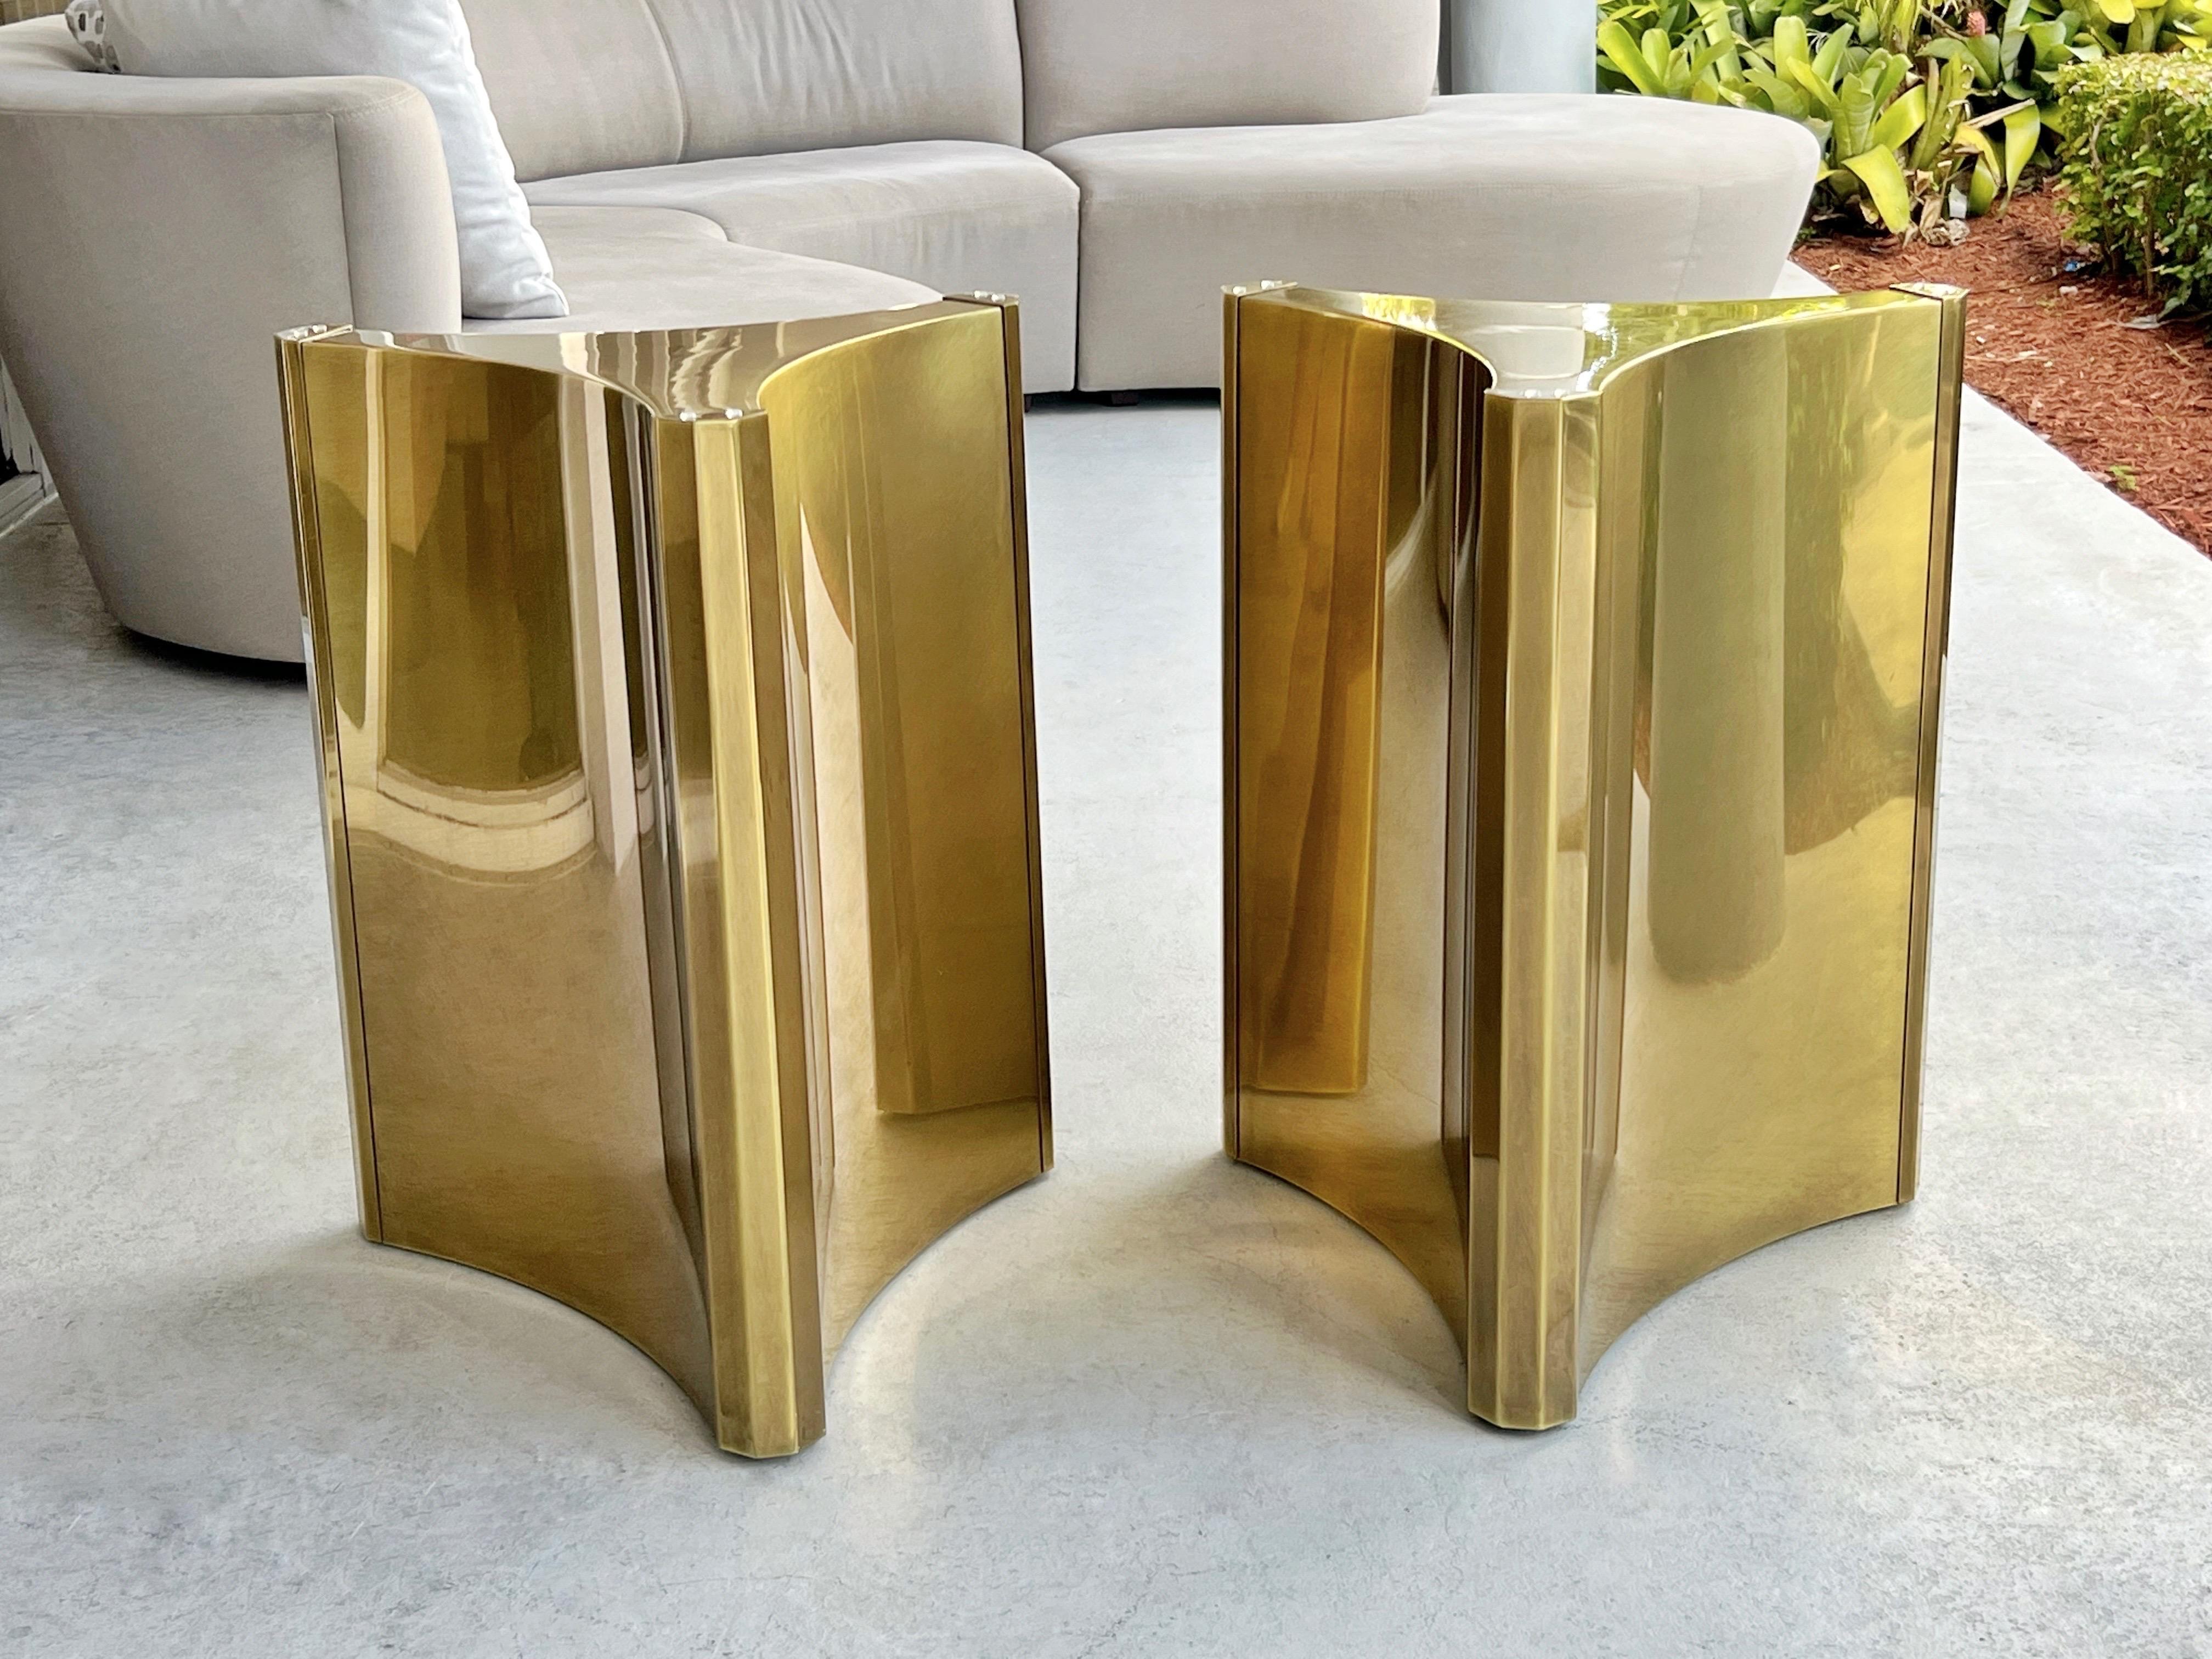 A fantastic Mastercraft dining table. 2 triedri brass bases support the glass top. 
The bases retain the original patina.